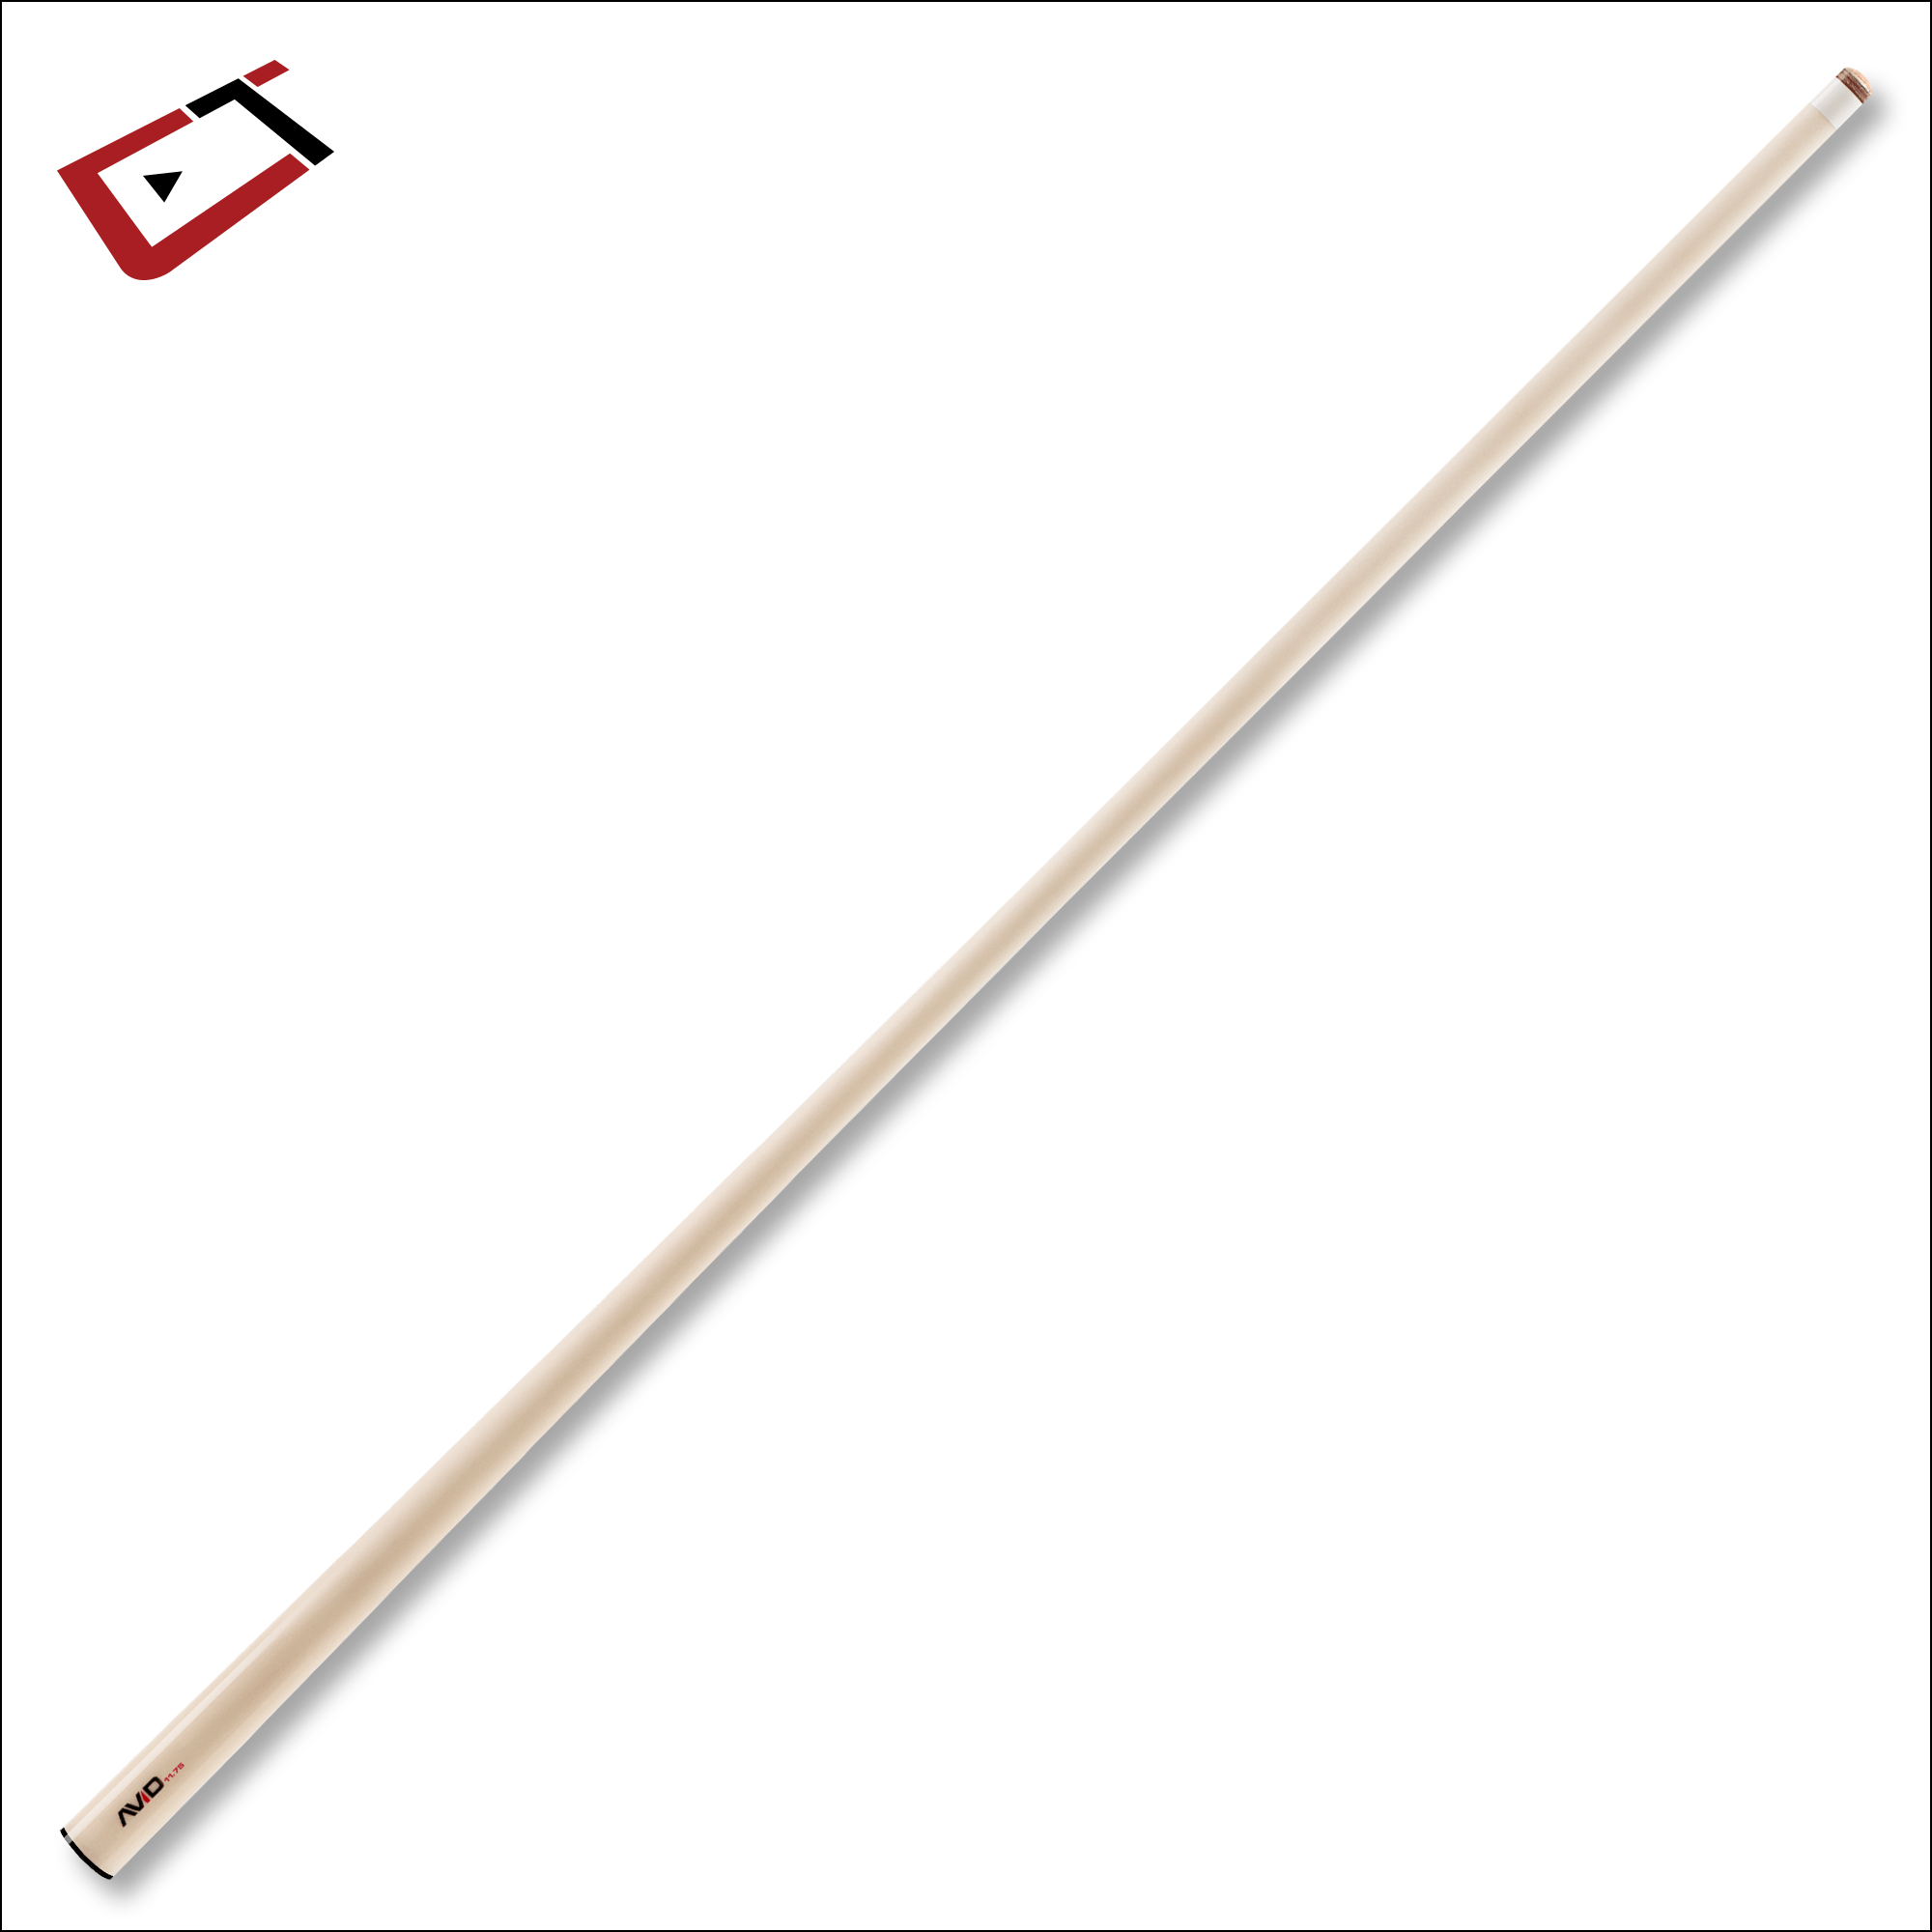 Imperial Pool Cue Imperial - AVID Chroma Highlands Cue (12.75 Shaft) - 95-396NW